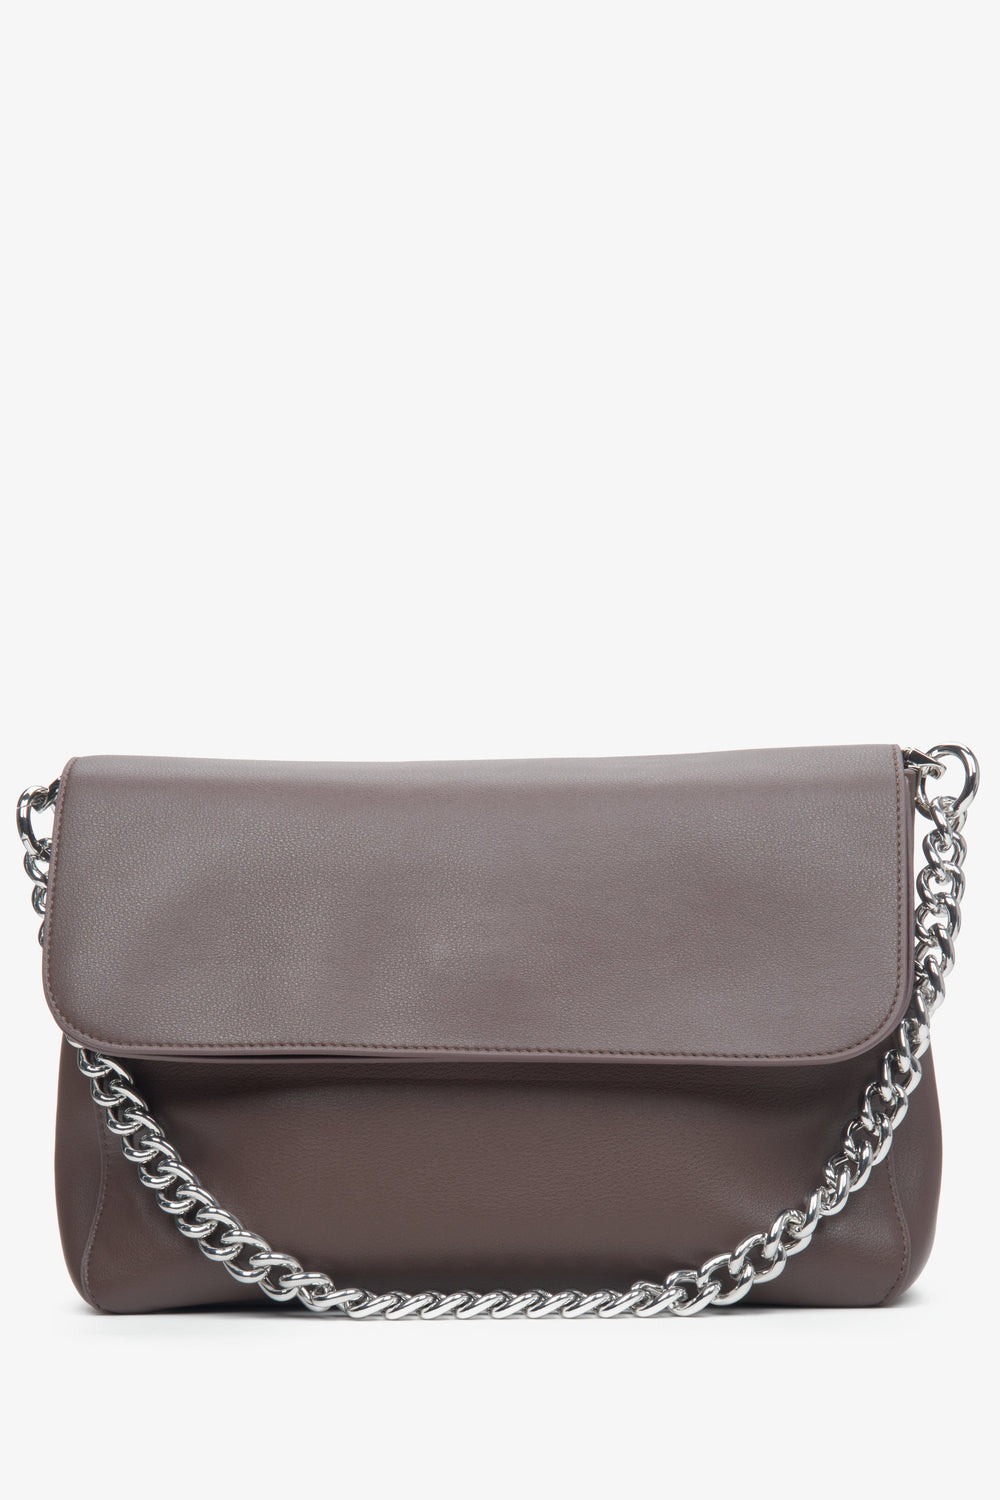 Women's Dark Brown Crossbody Bag with Chain made of Genuine Leather Estro ER00113764.